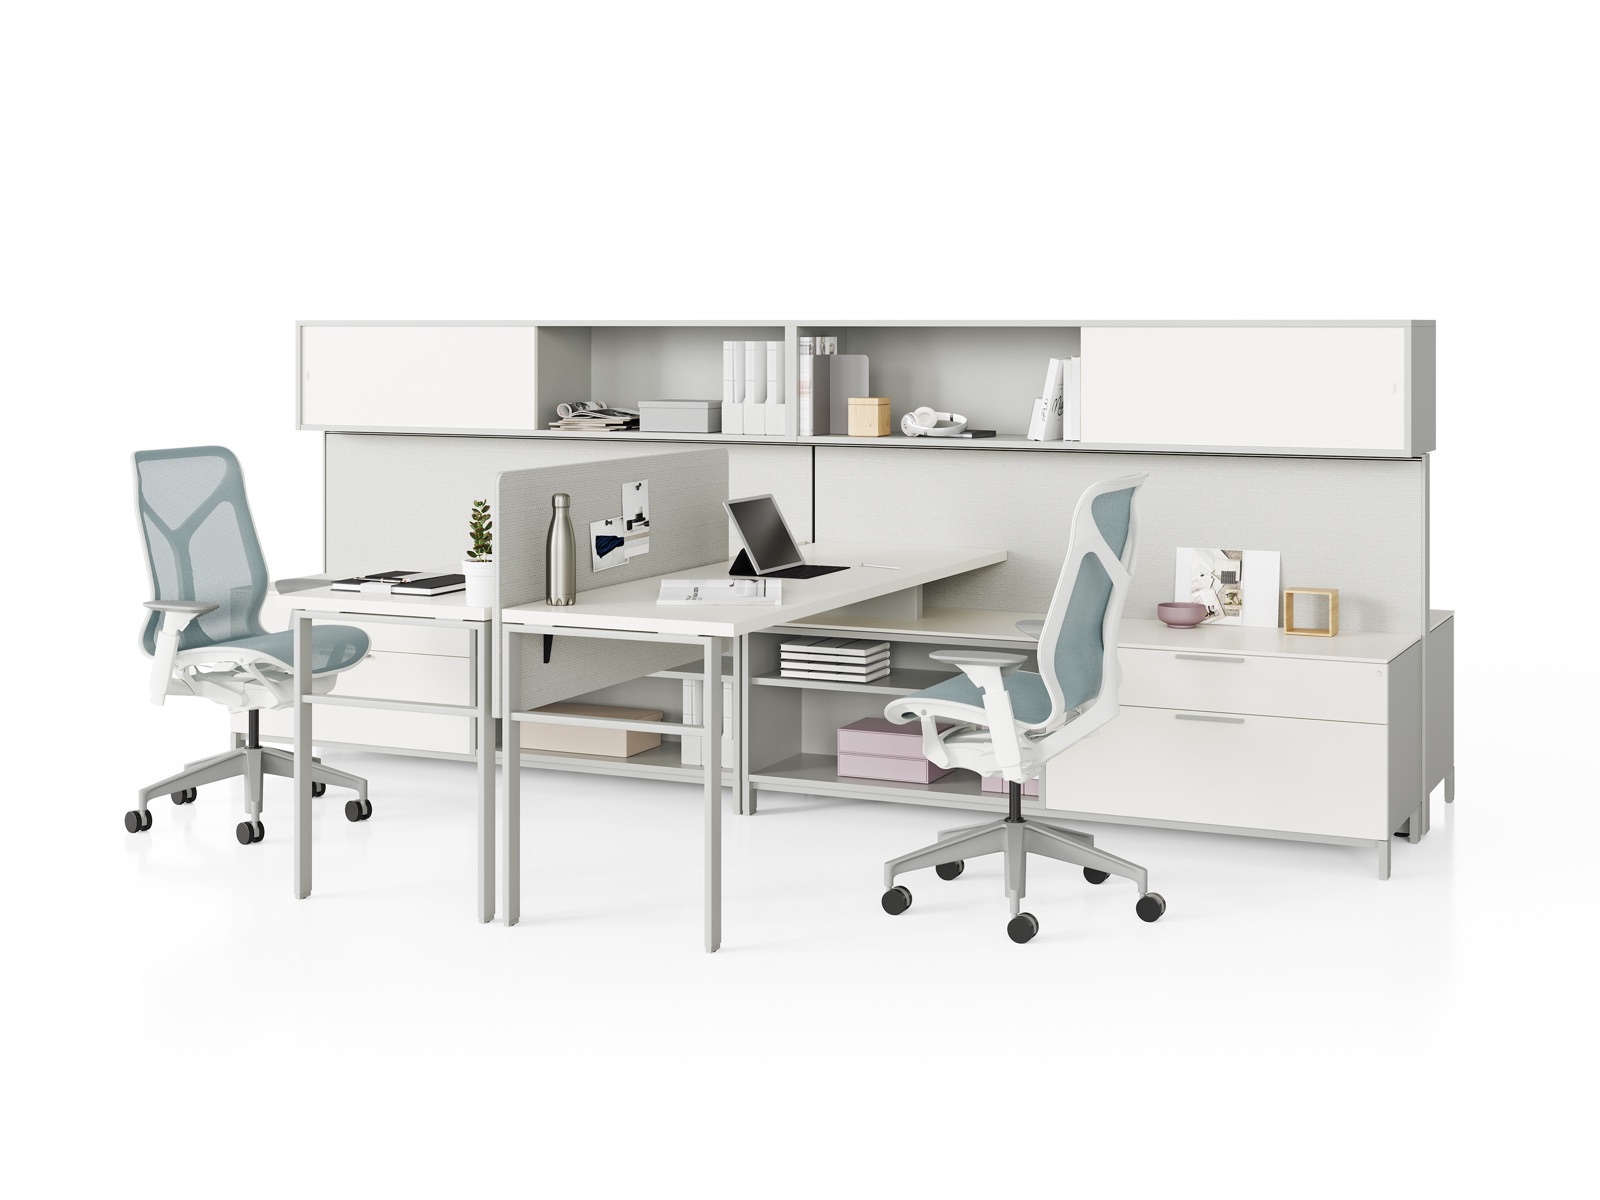 Two grey Canvas Wall workstations with white storage, surfaces, grey screens, and light blue Cosm Chairs.